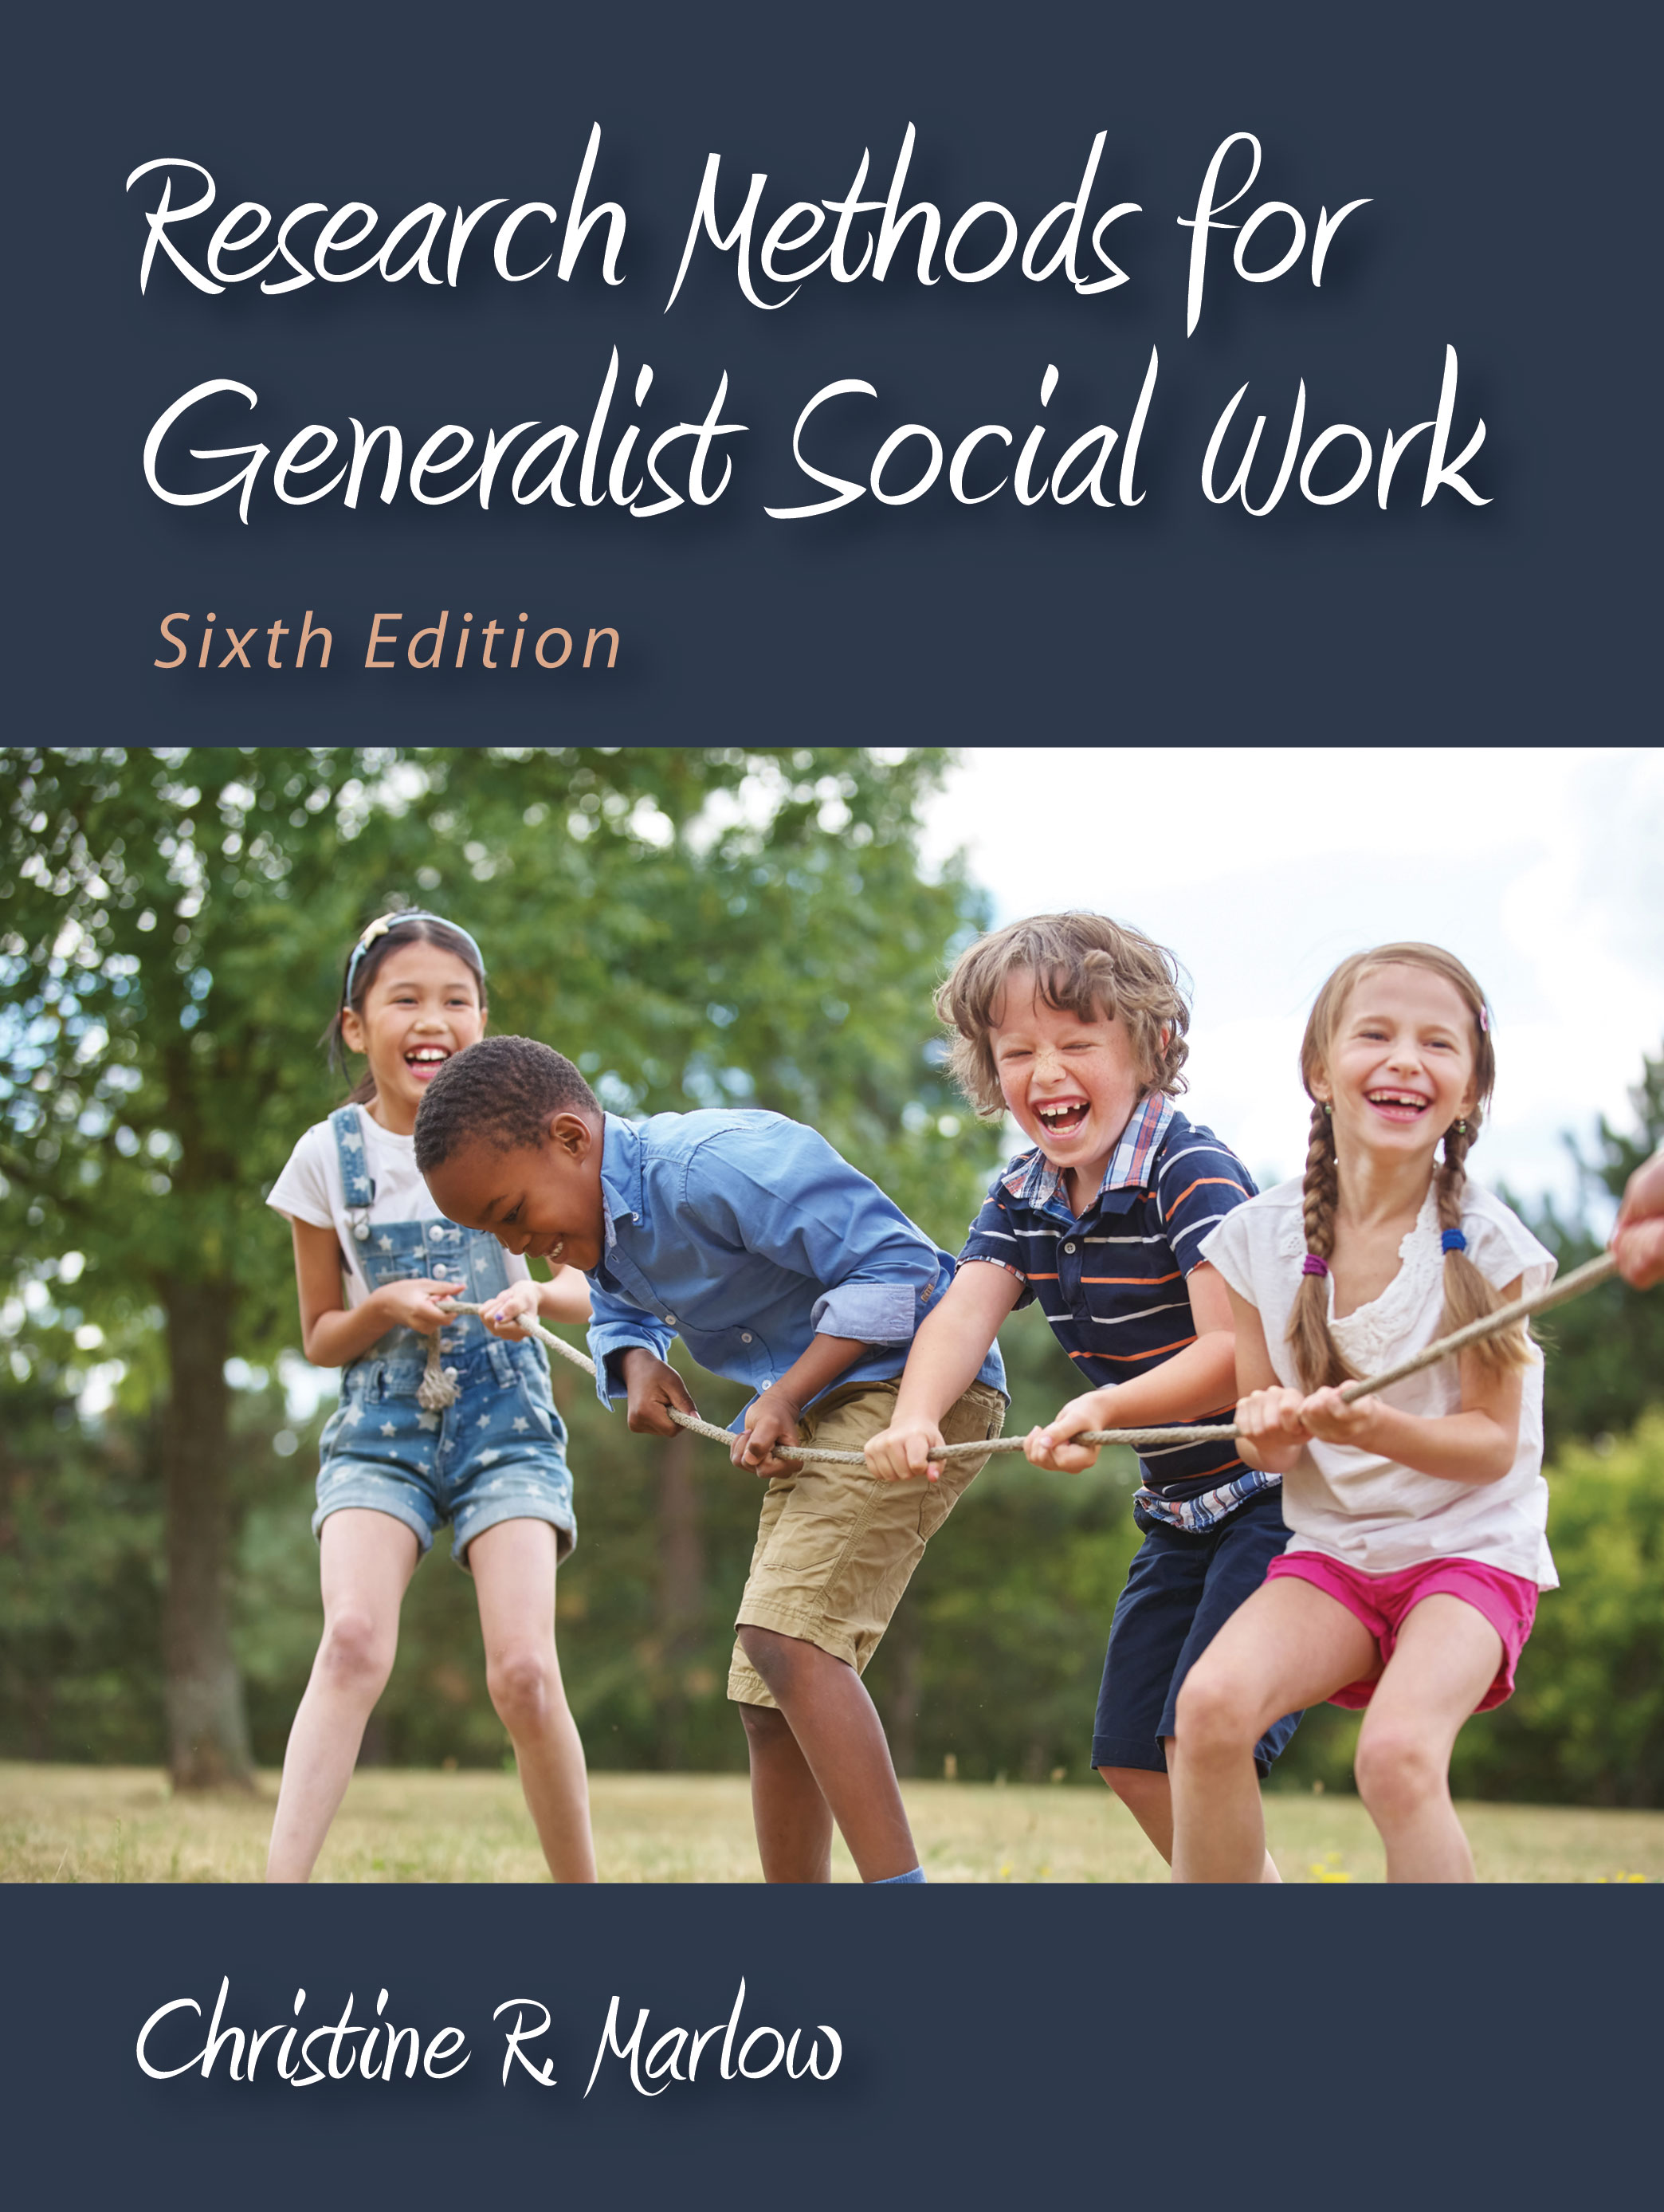 Research Methods for Generalist Social Work: Sixth Edition by Christine R. Marlow